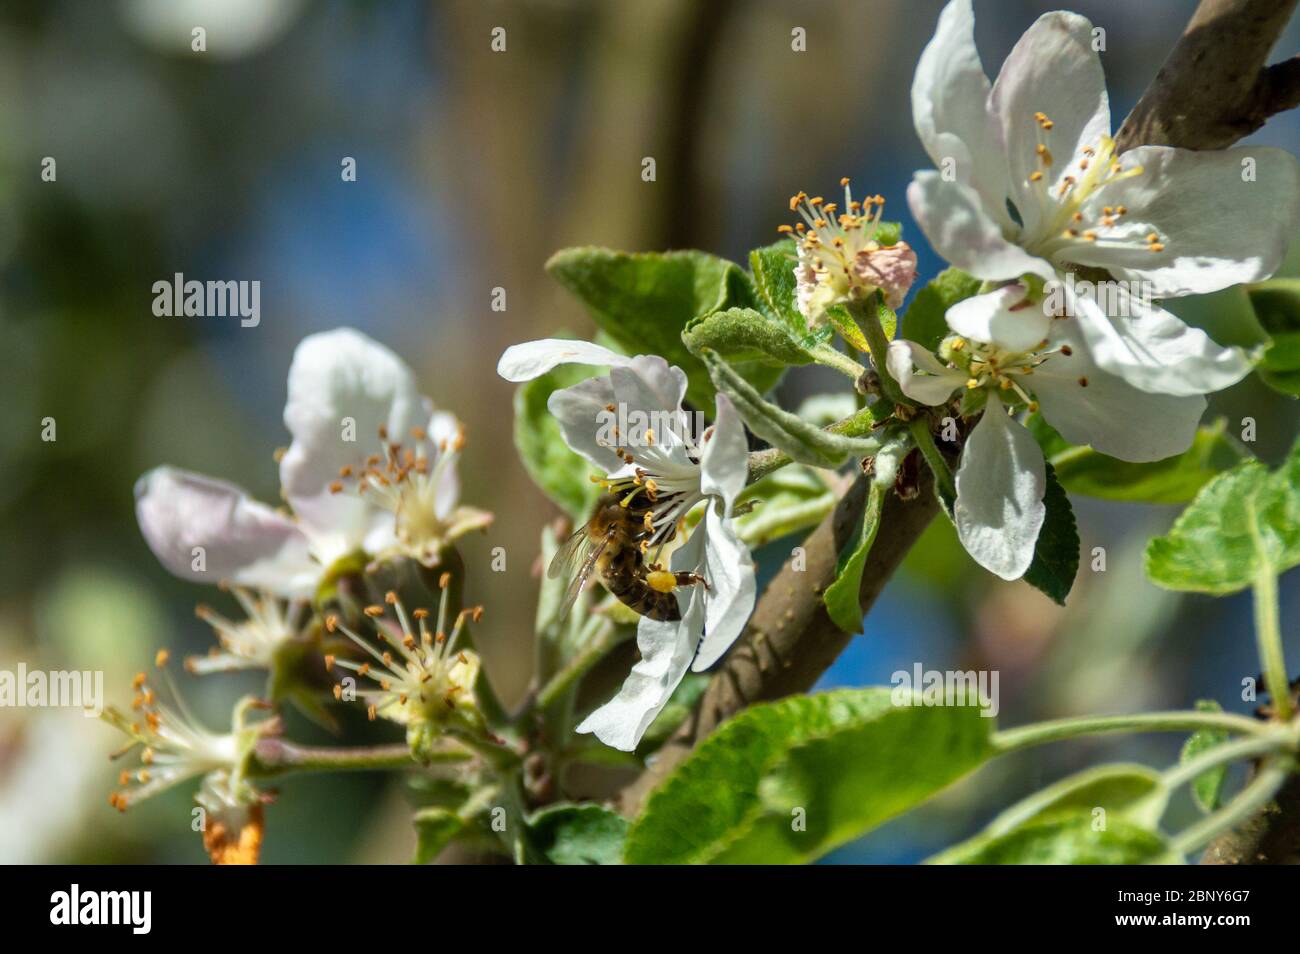 European bee close-up on apple flower pollinating apple tree in spring blooming garden. honeybee gathering nectar pollen honey in apple tree flowers. Stock Photo